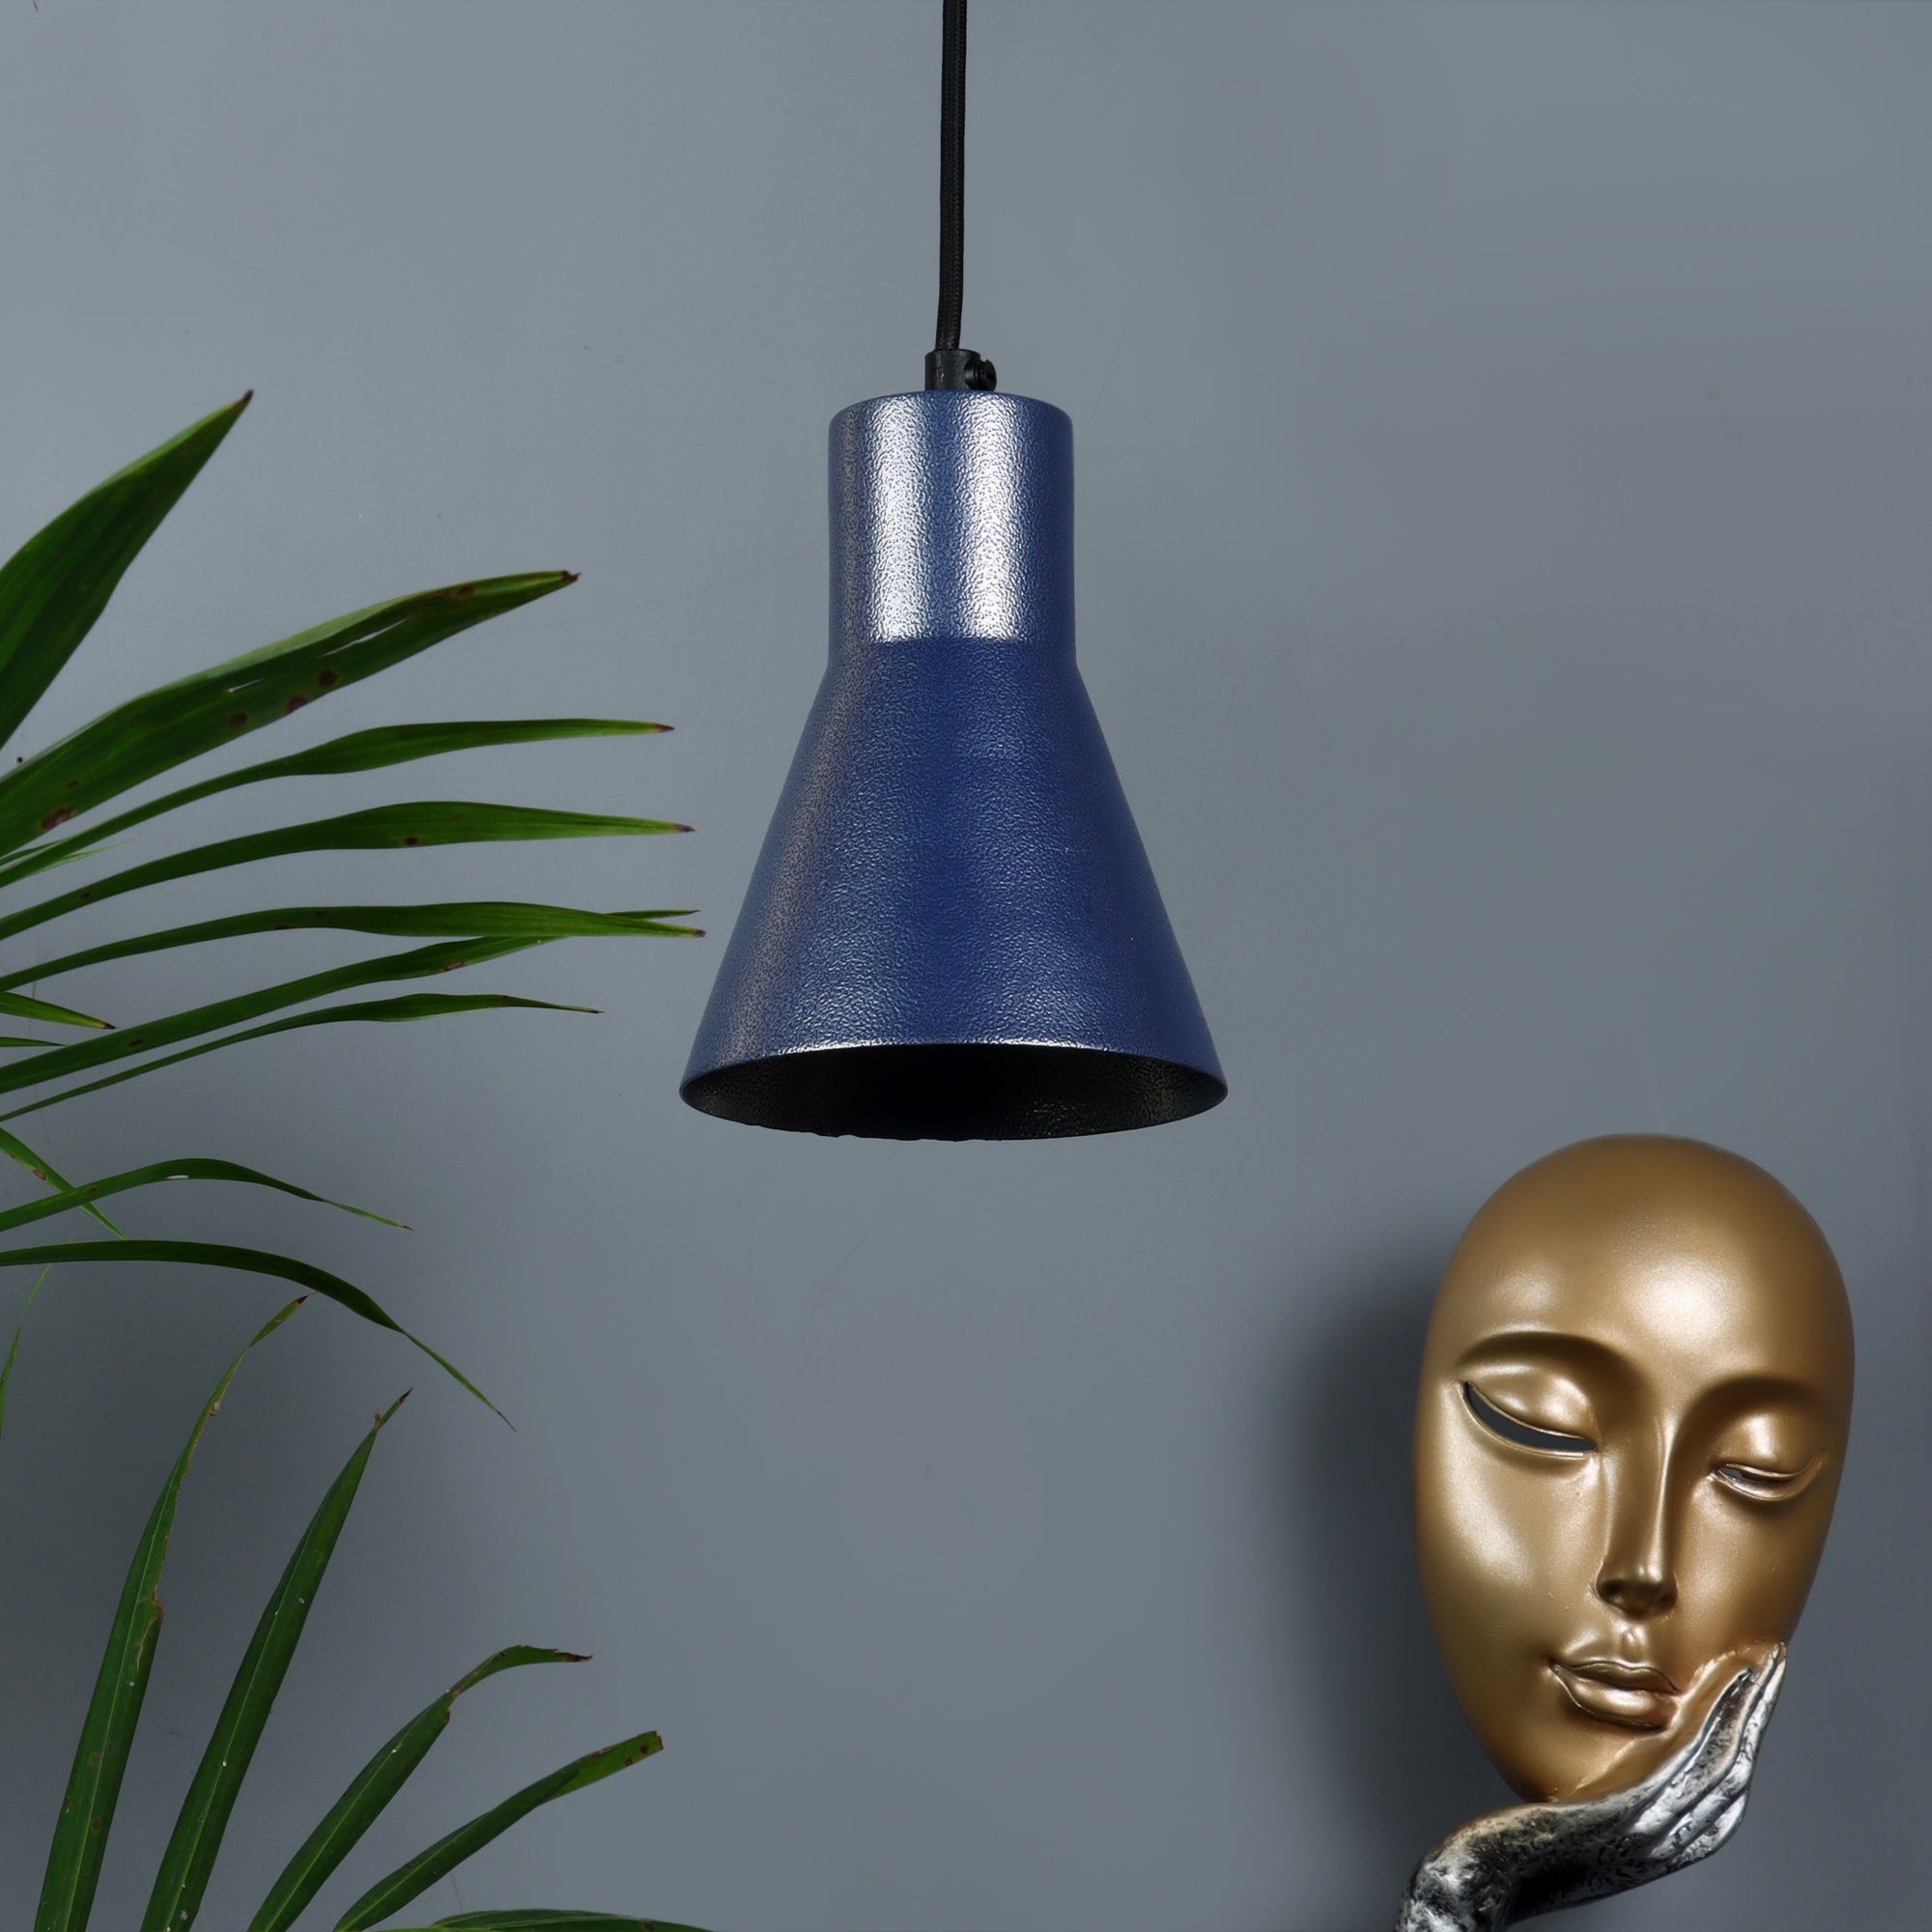 Limpid Blue Hanging Light by SS Lightings